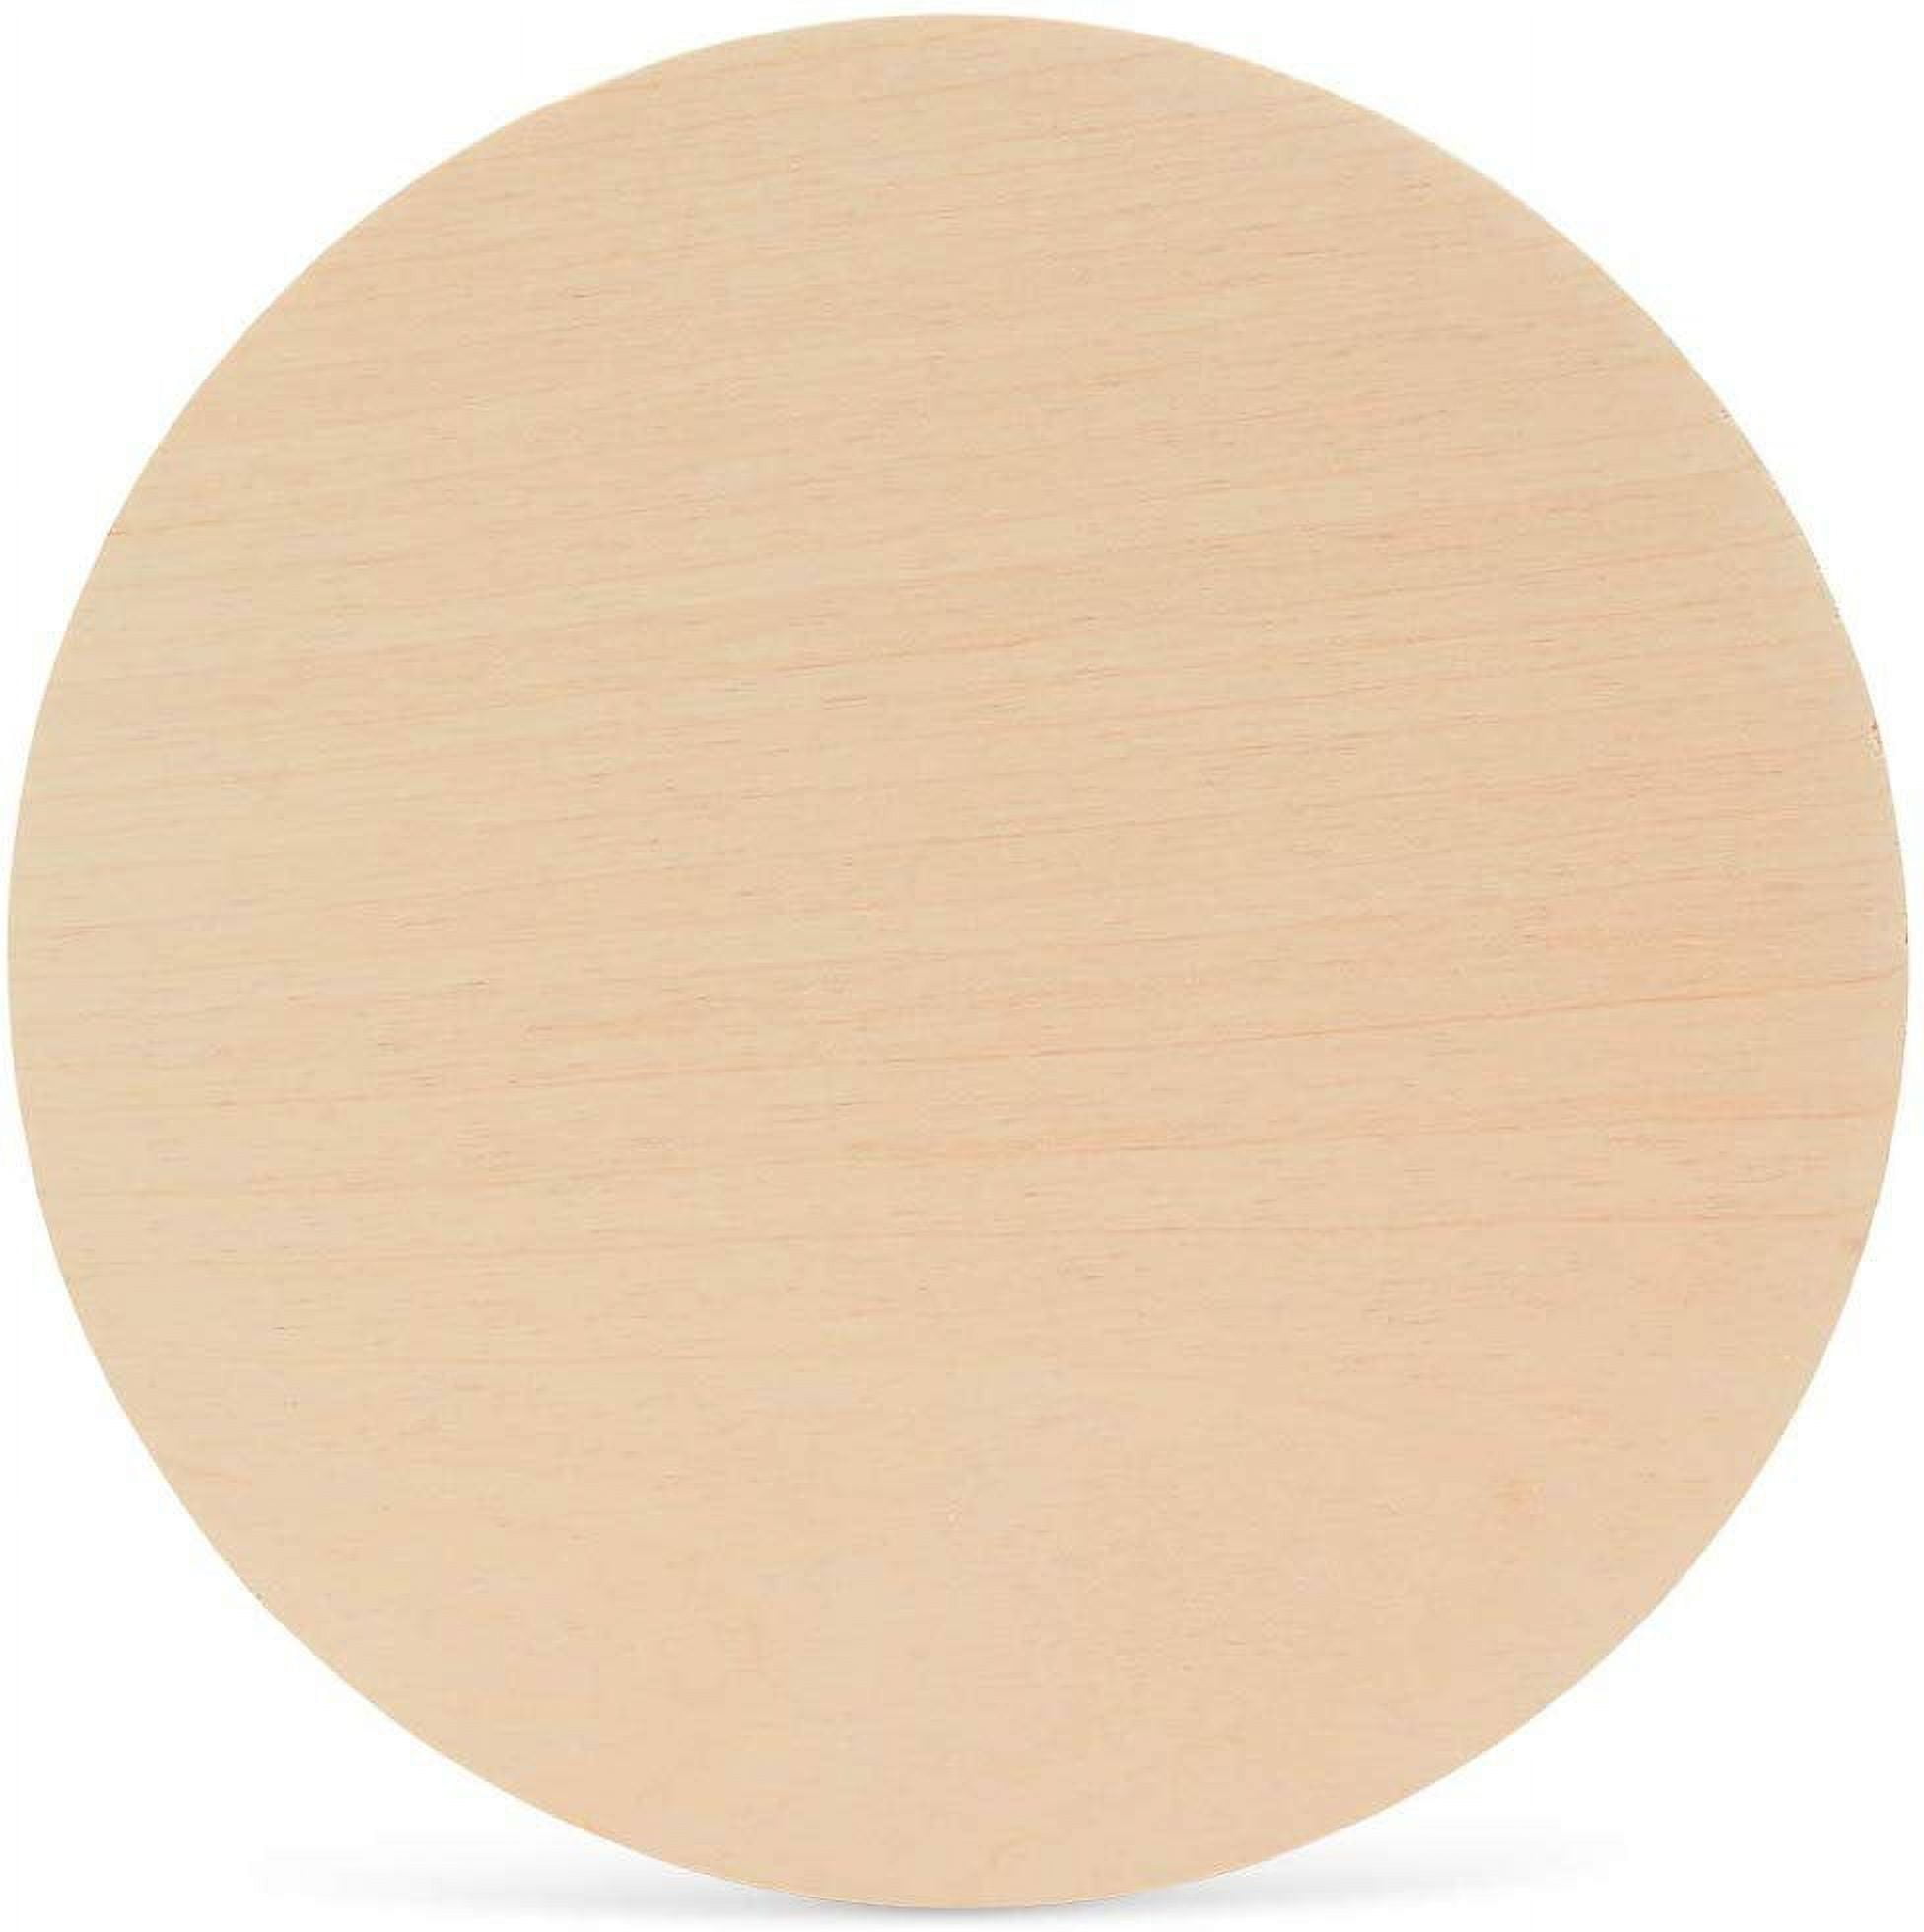 Unfinished Wood Round Discs, Domed Wooden Circle for Crafts, Woodpeckers